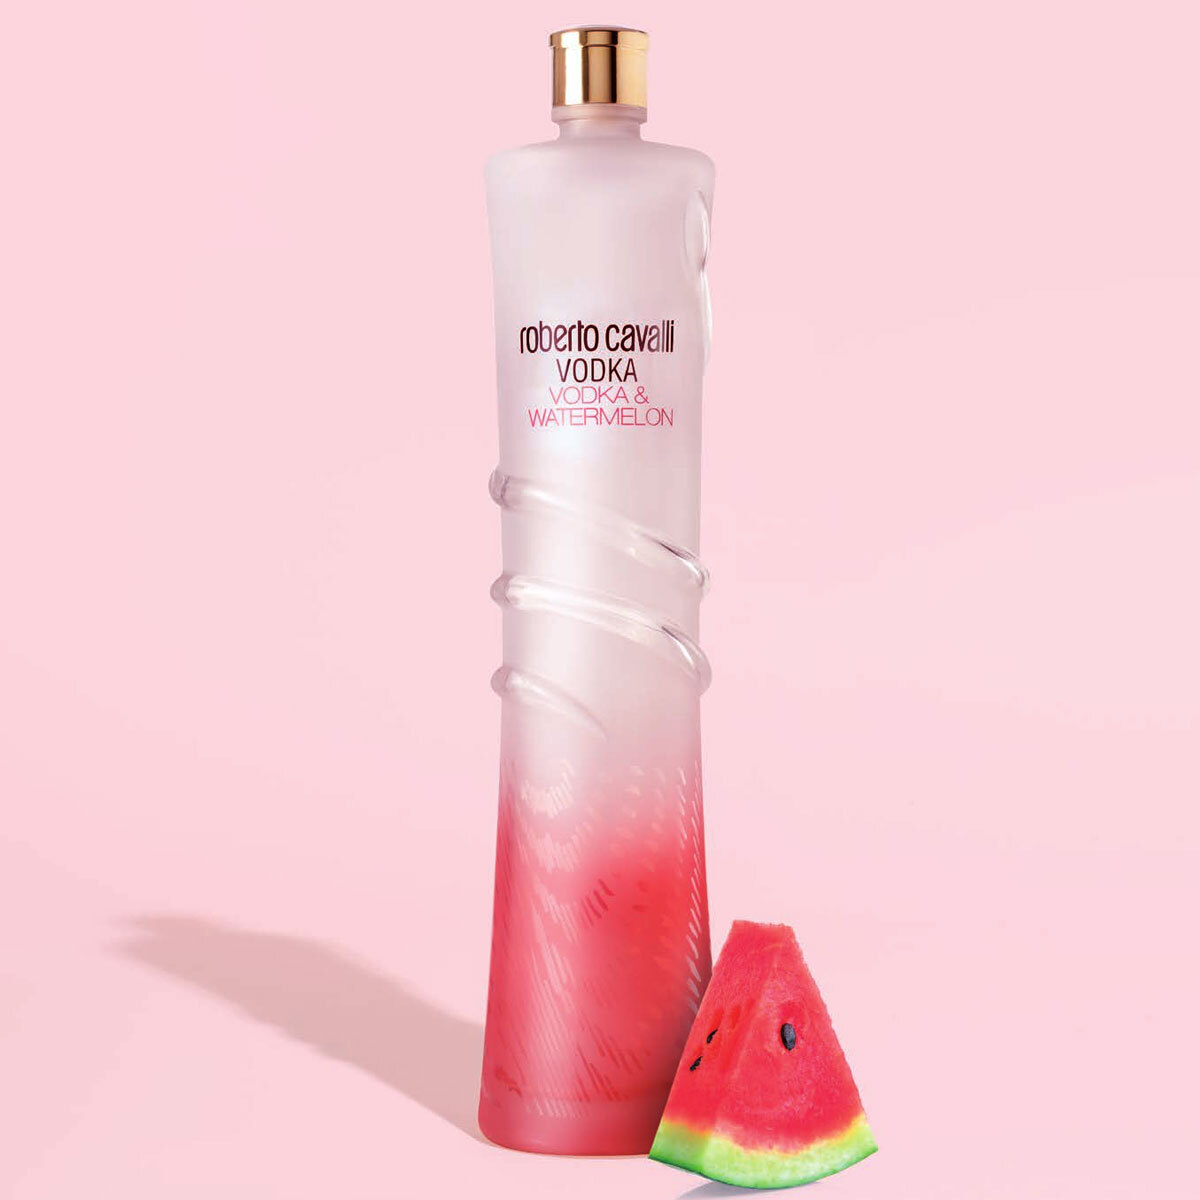 Lifestyle image of bottle in front of pink background with watermelon